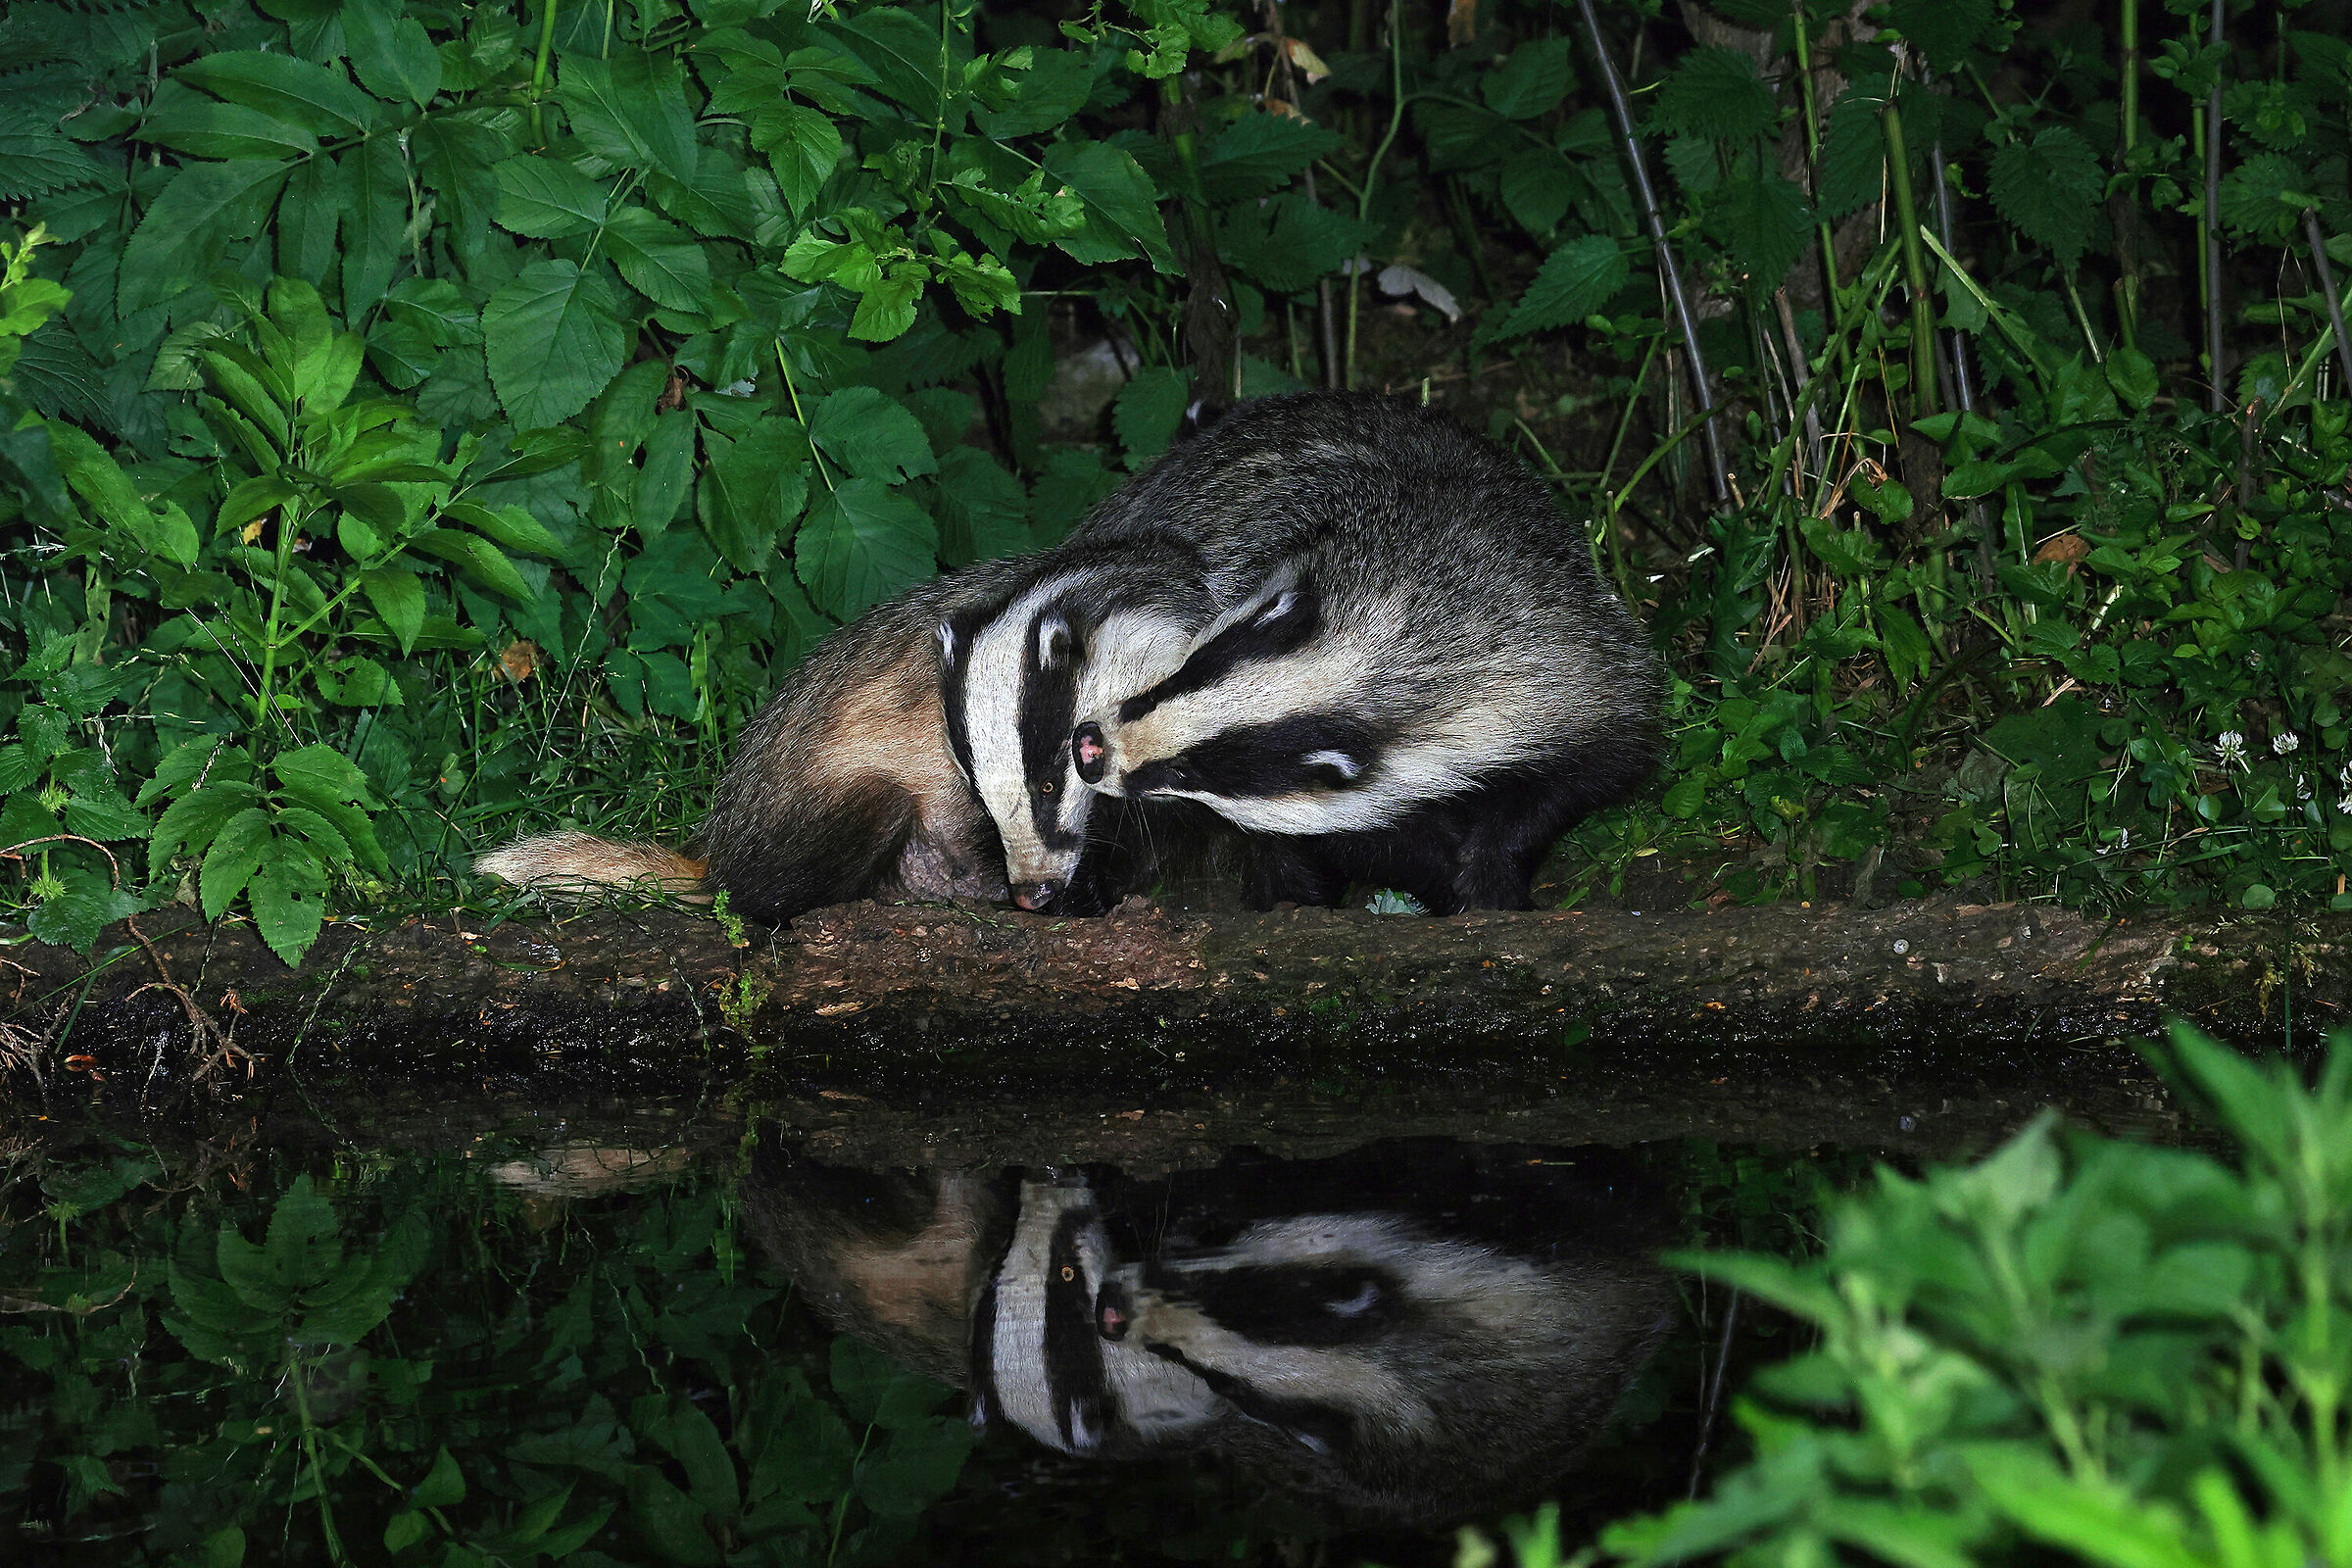 Mom badger with son...